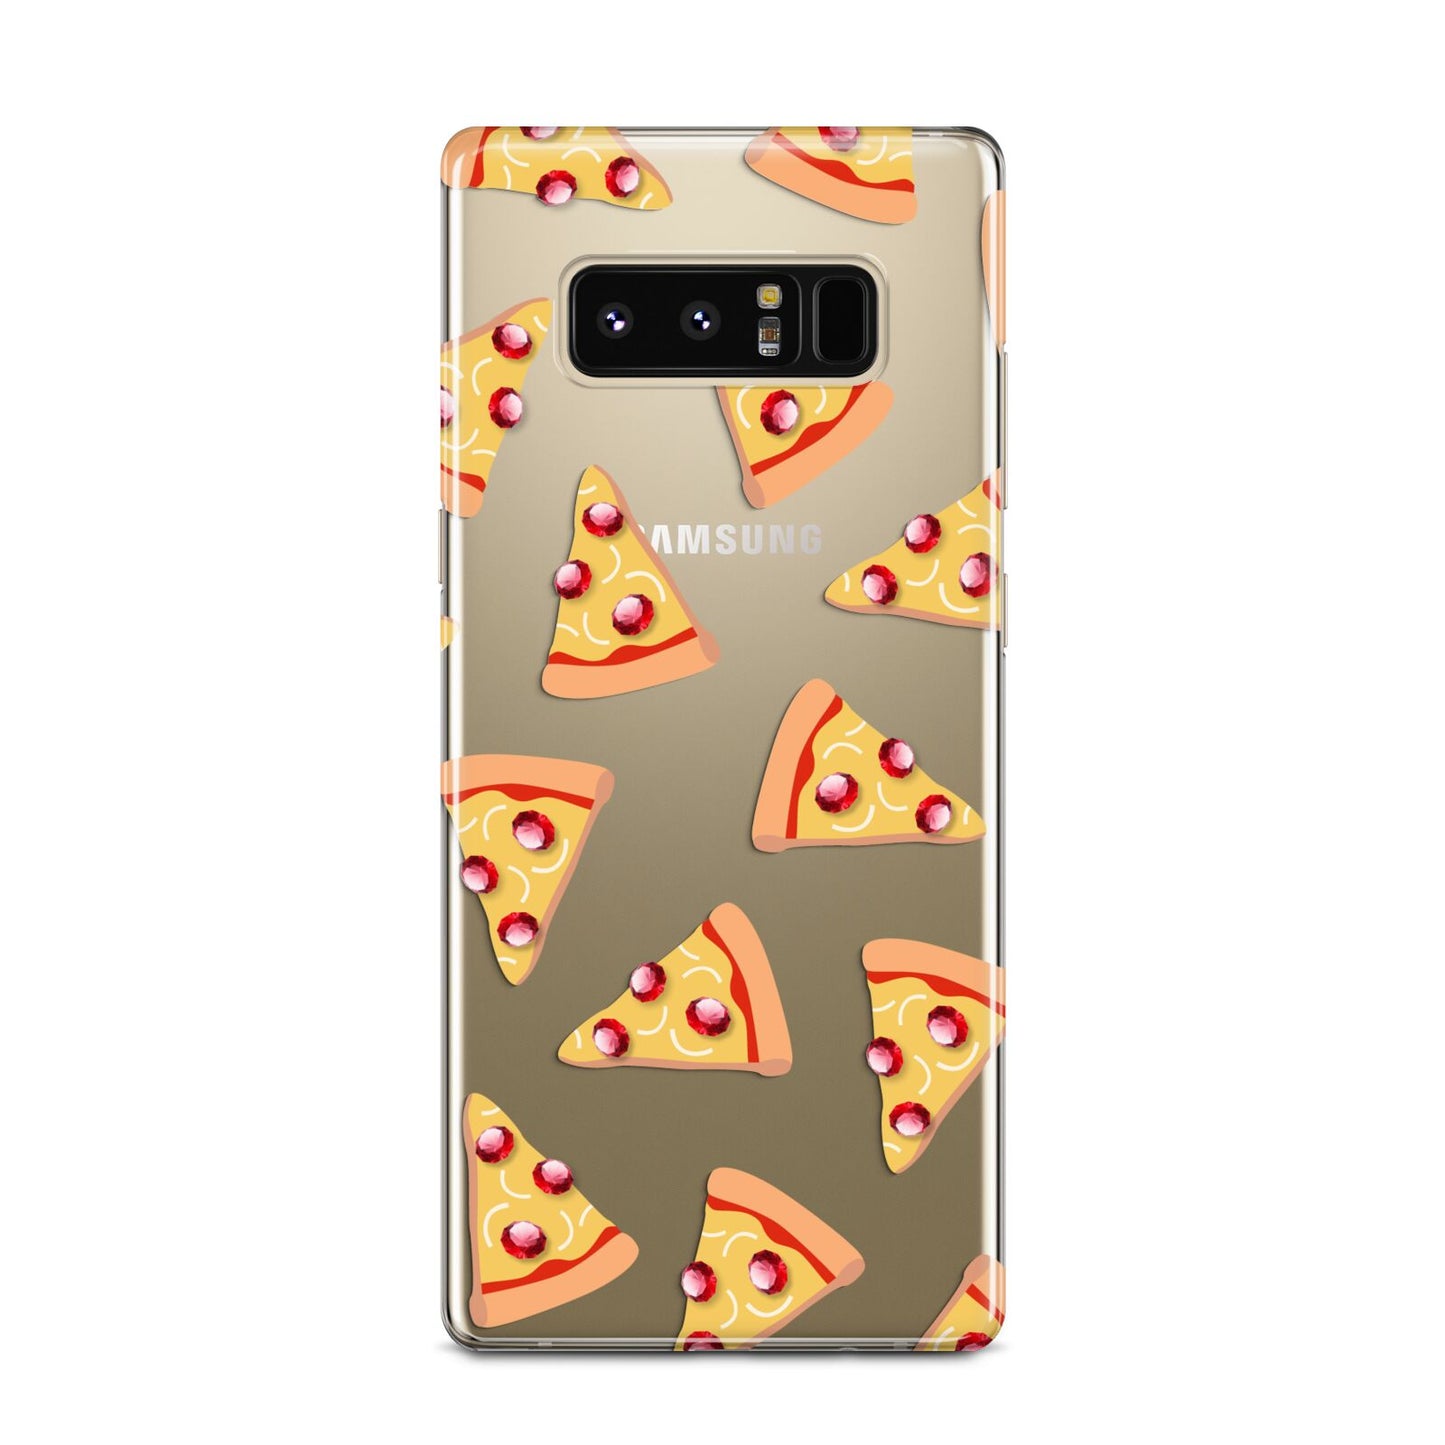 Rubies on Cartoon Pizza Slices Samsung Galaxy Note 8 Case